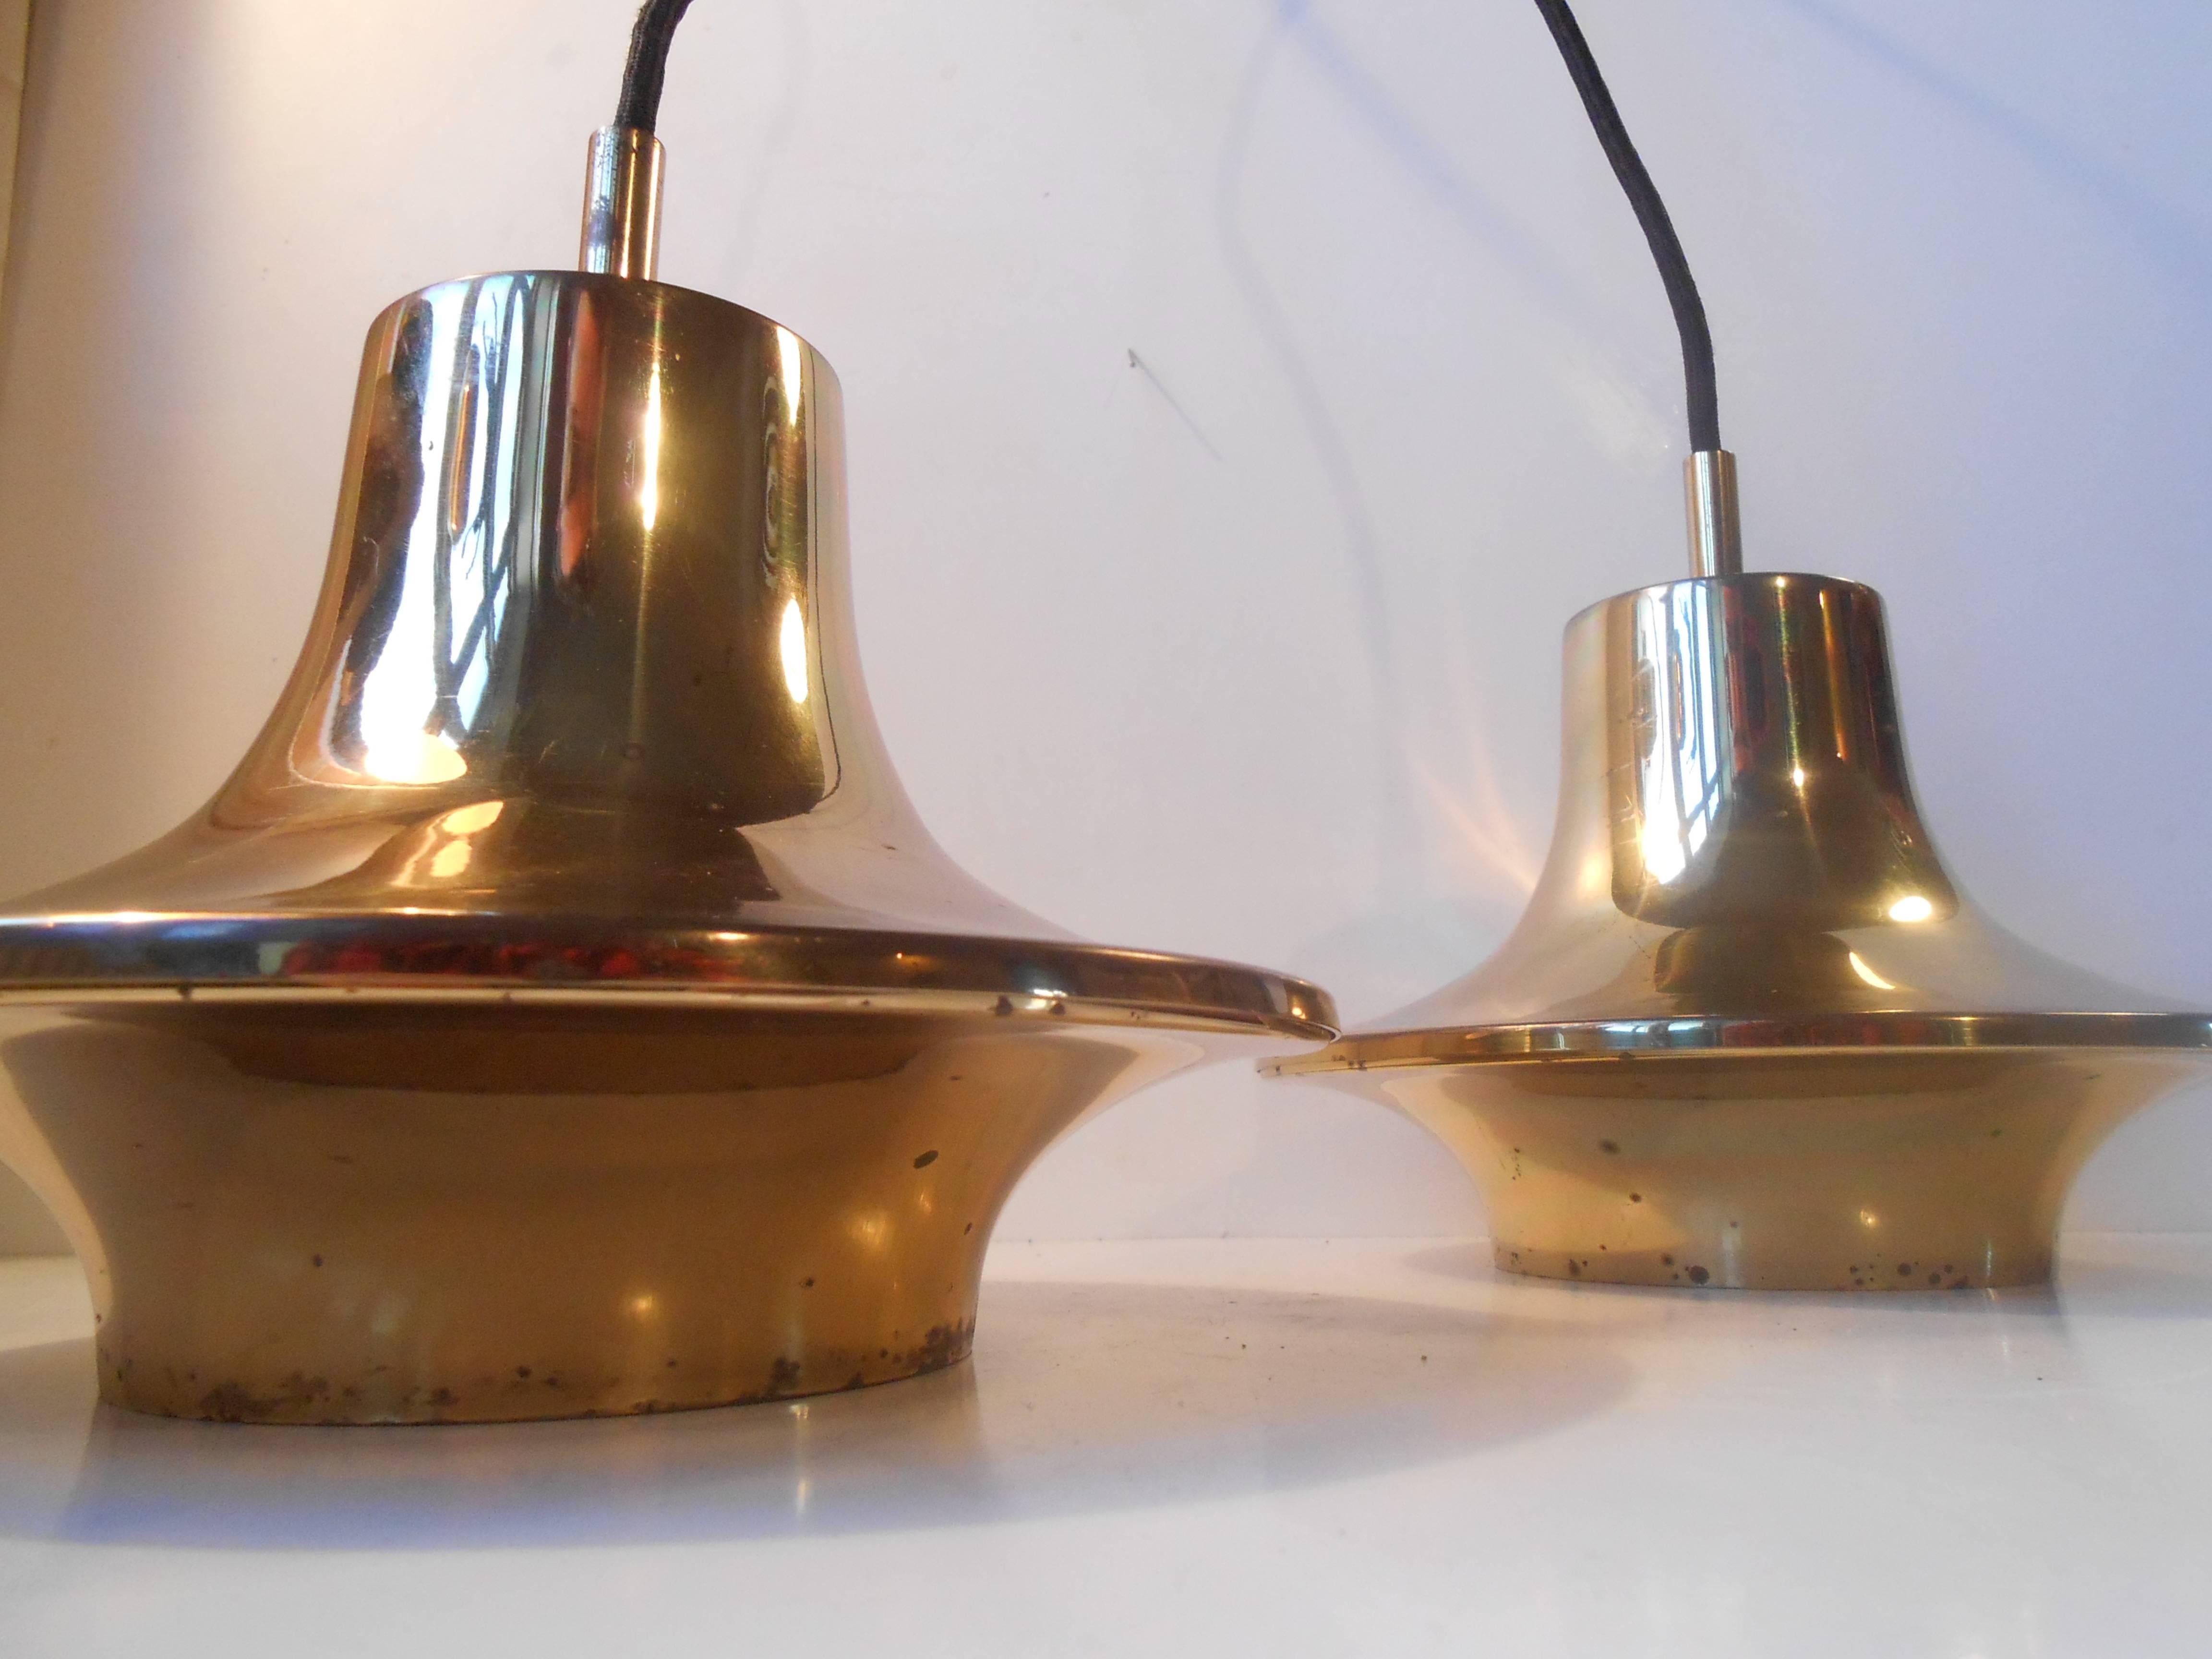 Patinated Hans-Agne Jakobsson Pair of Solid Brass Saucer Pendant Lamps, 60s Swedish Modern